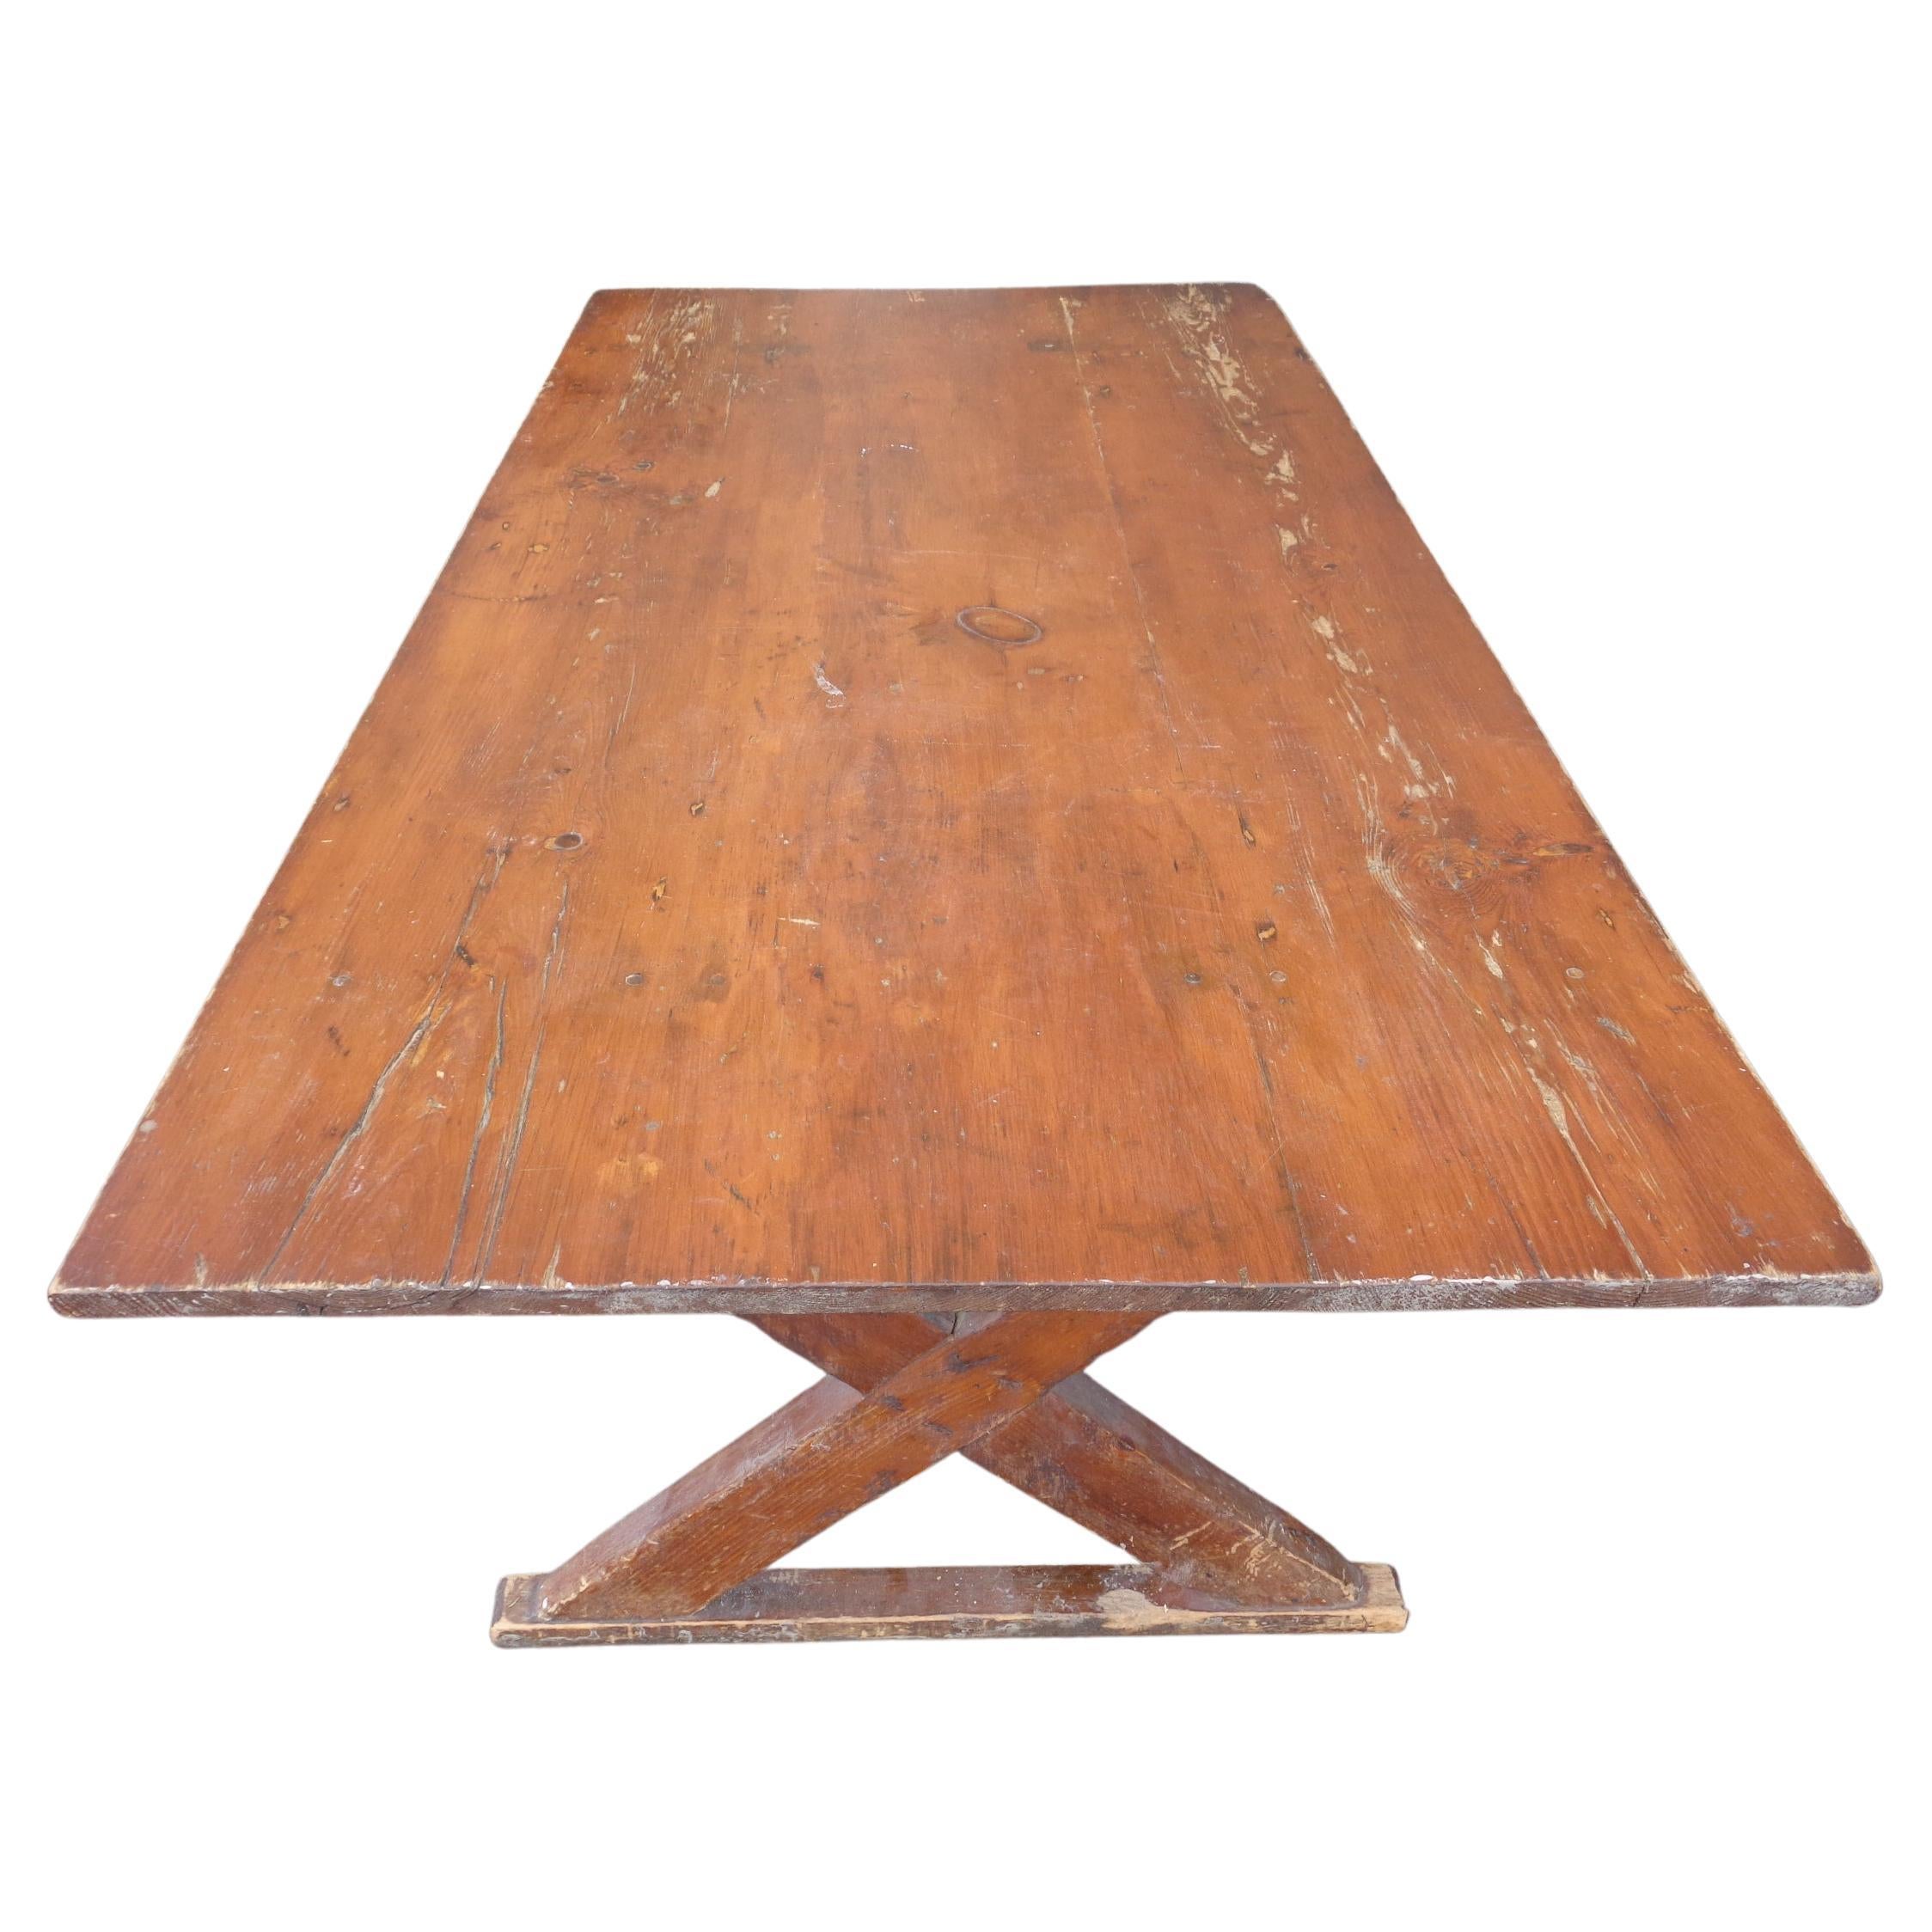  Country Pine Sawbuck Trestle Dining Table, Circa 1940 For Sale 1